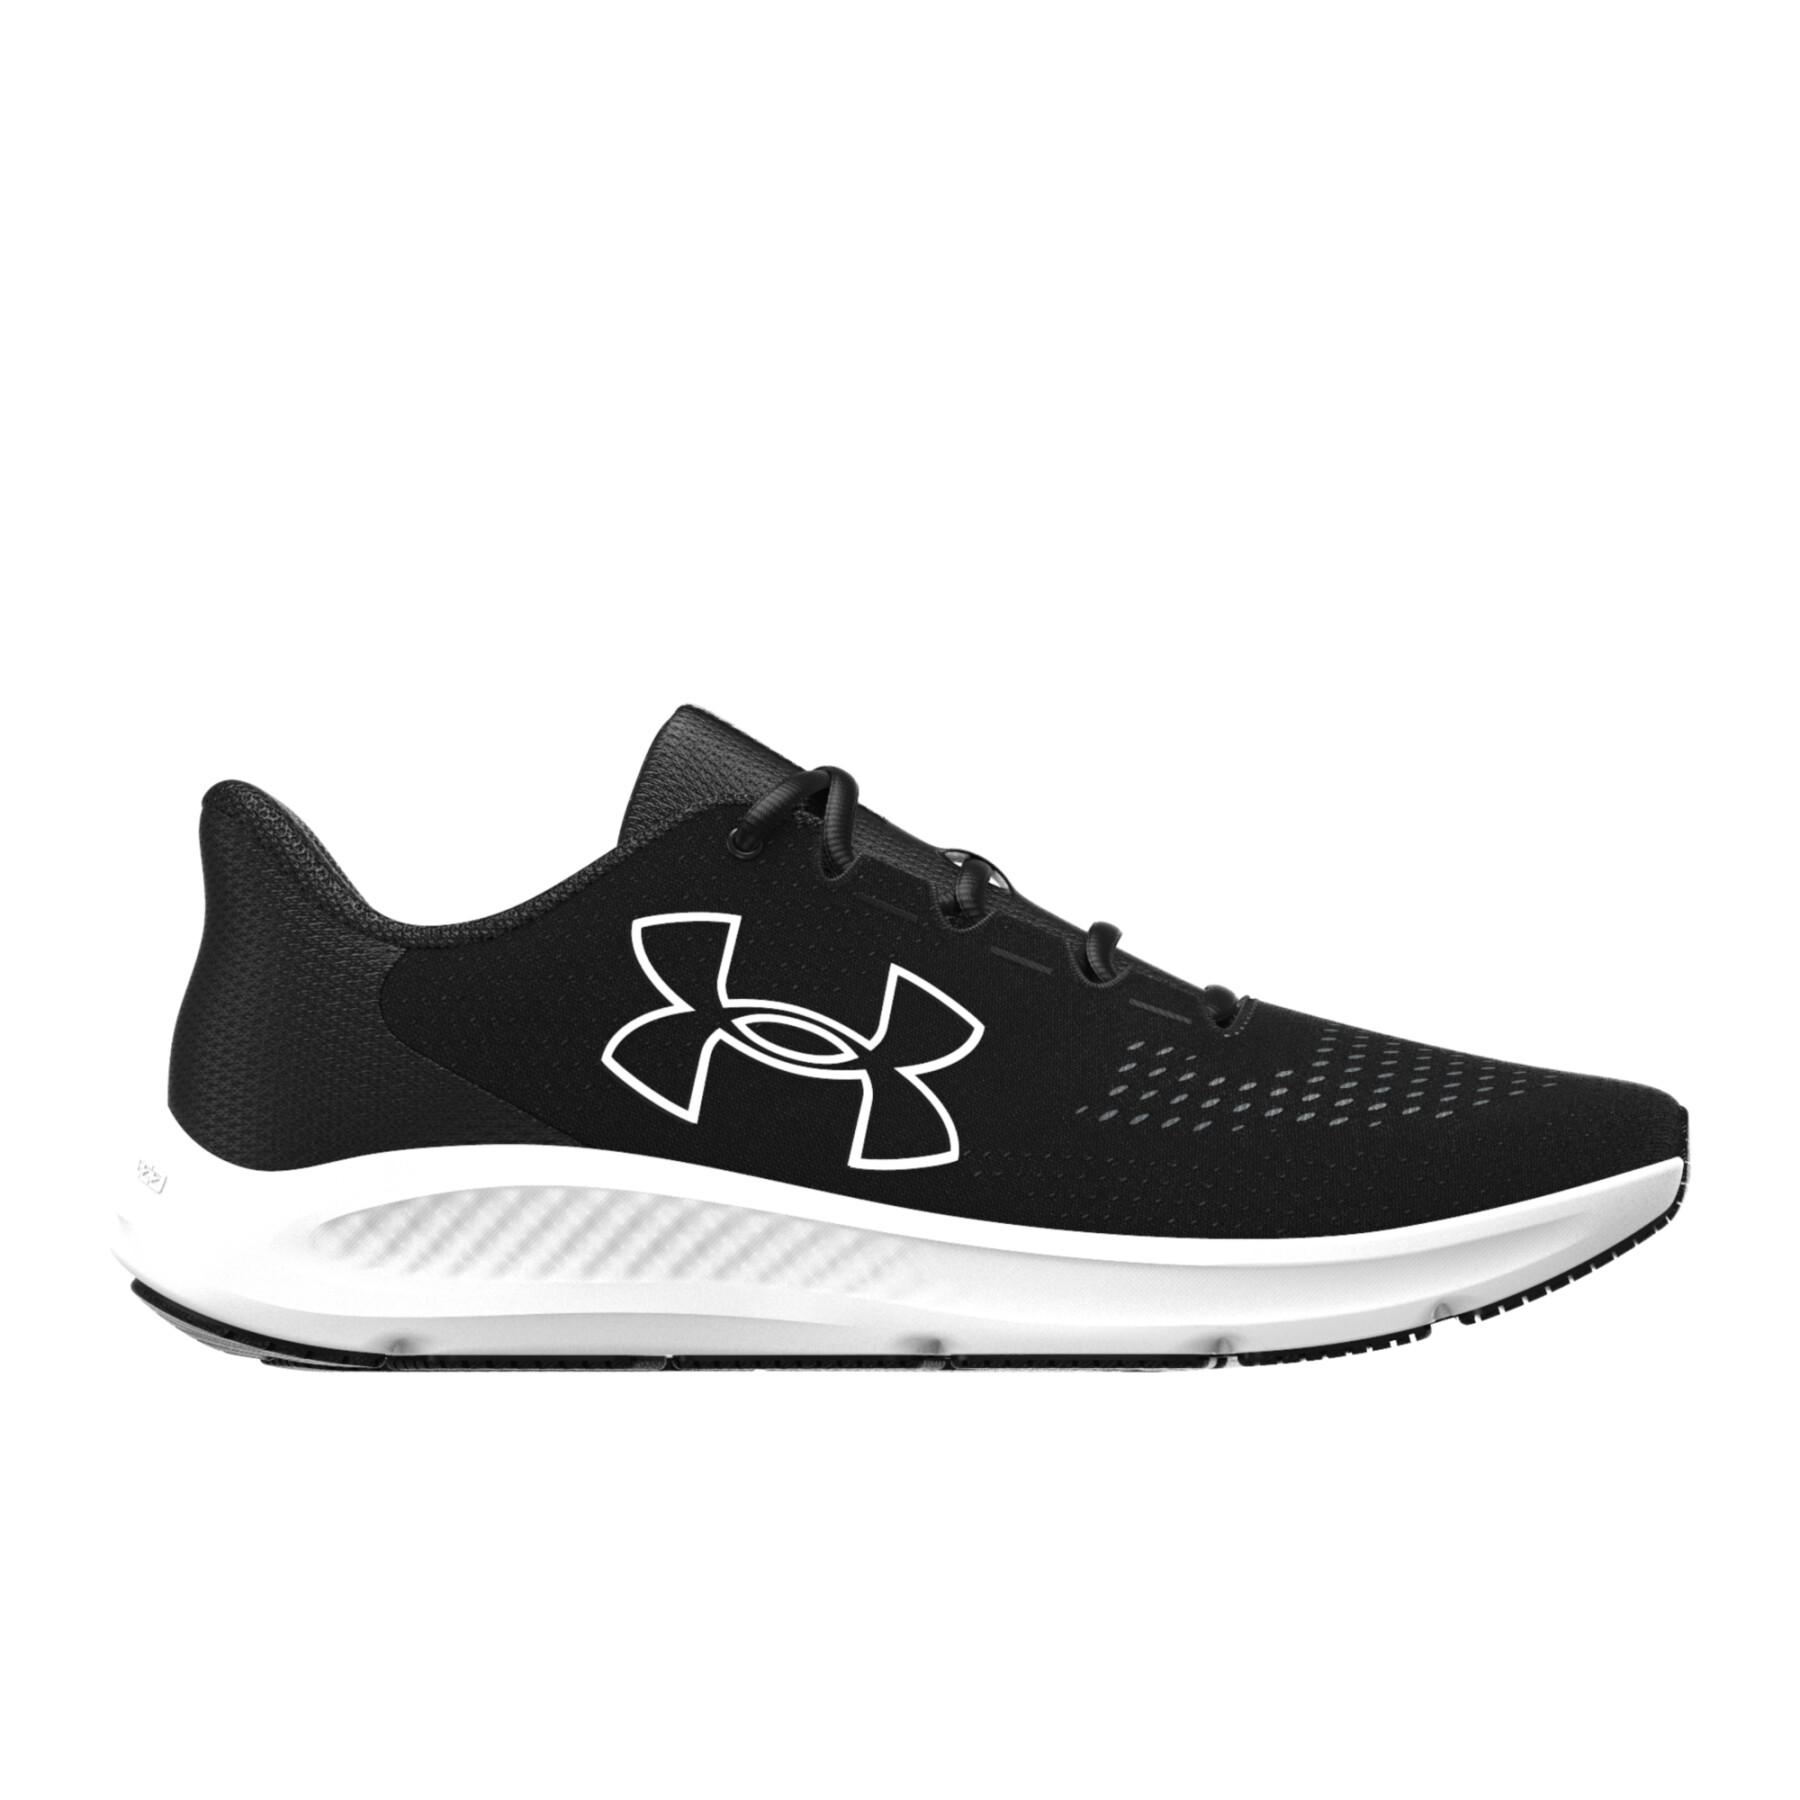 Chaussures de running Under Armour Charged Pursuit 3